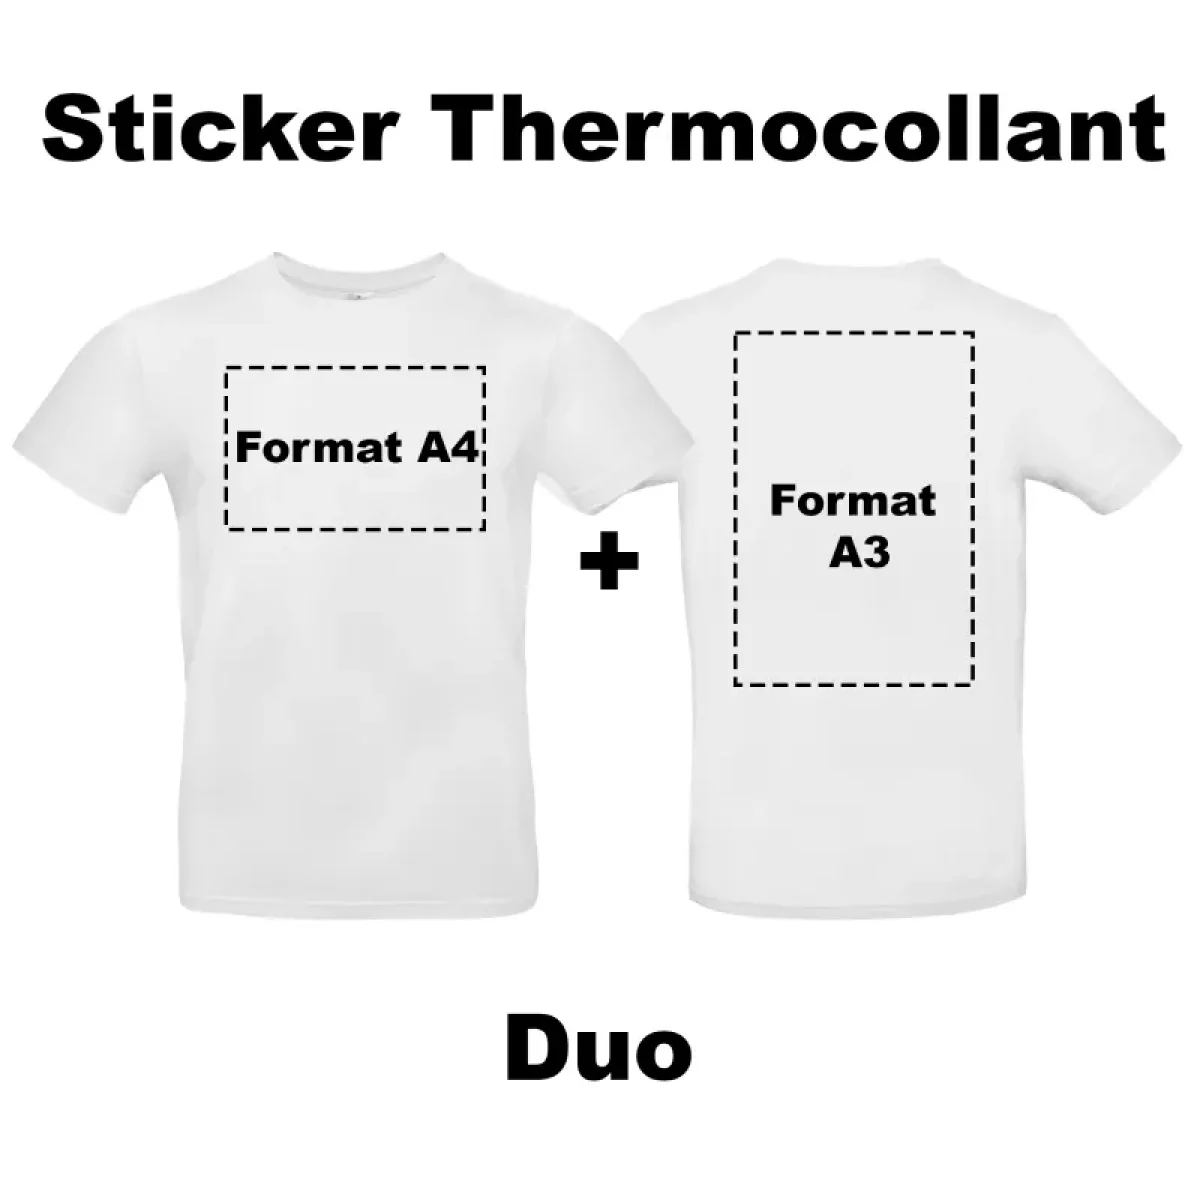 Sticker thermocollant personnalisé Taille Logo (Taille maximum : 10 x 10cm)  - Brand-on